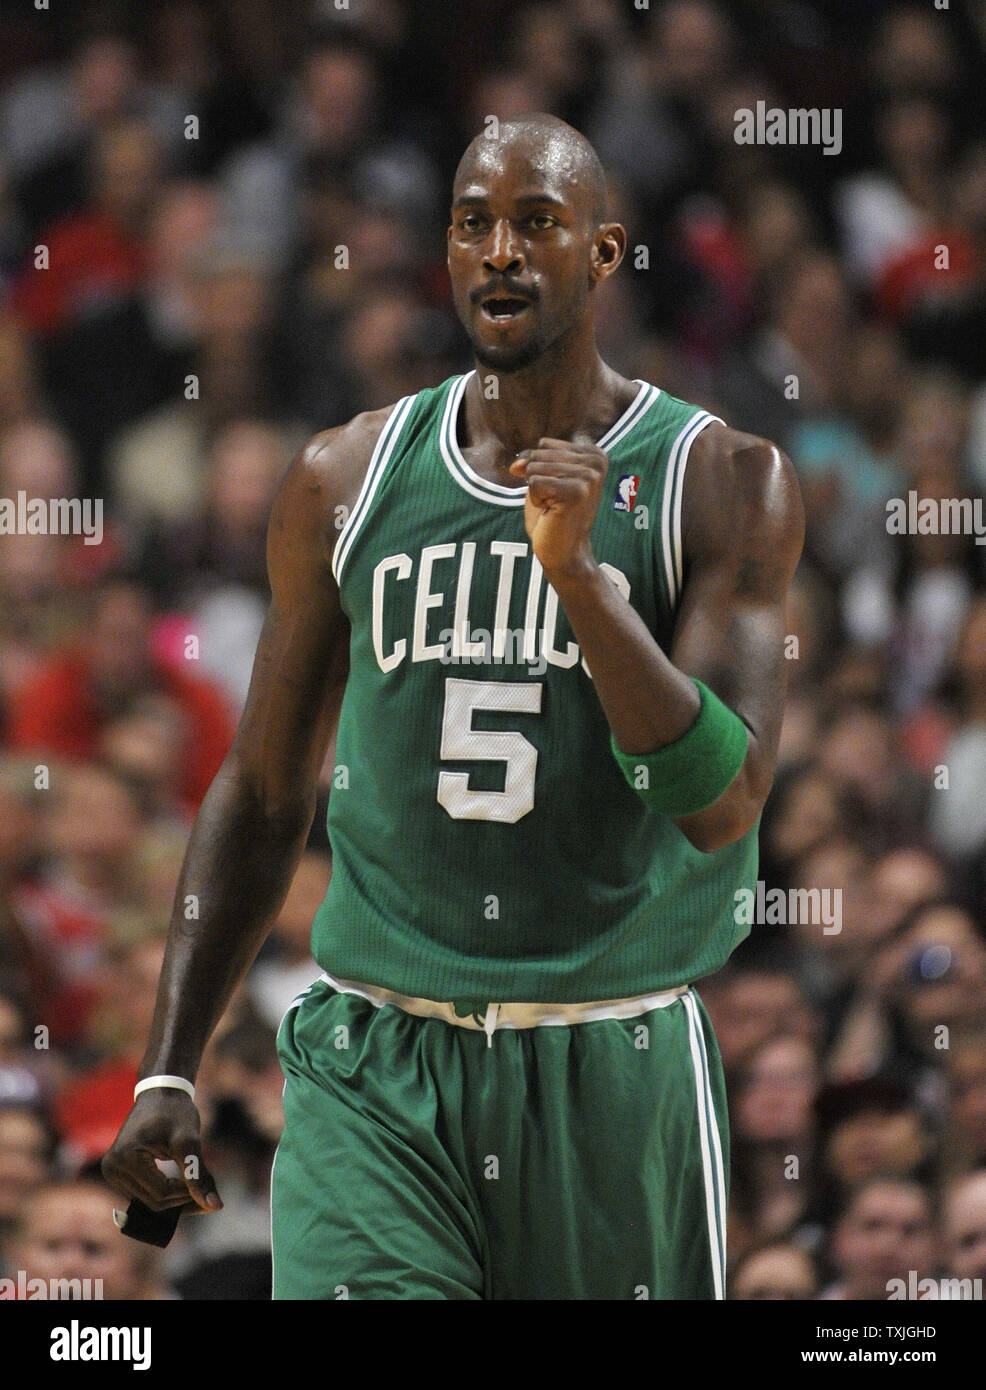 Boston Celtics forward Kevin Garnett pumps his fist after he was fouled during the first quarter against the Chicago Bulls at the United Center in Chicago on April 7, 2011.     UPI/Brian Kersey Stock Photo